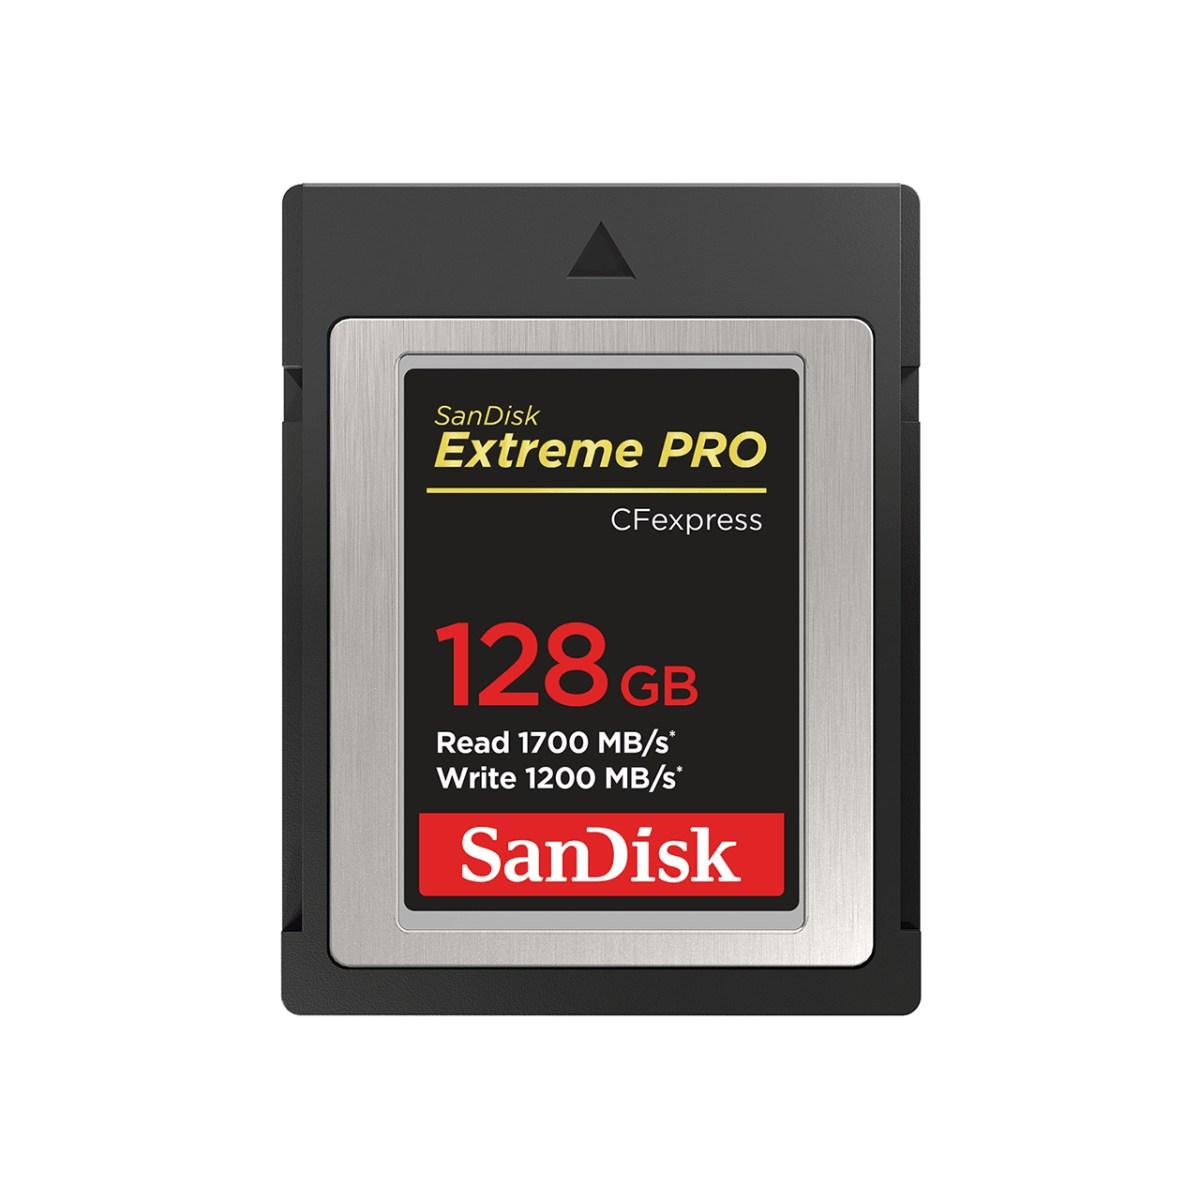 Card Sandisk Cfexpress Type B 128gb Extreme Pro up to 1700 mb/s read 1200 mb/s